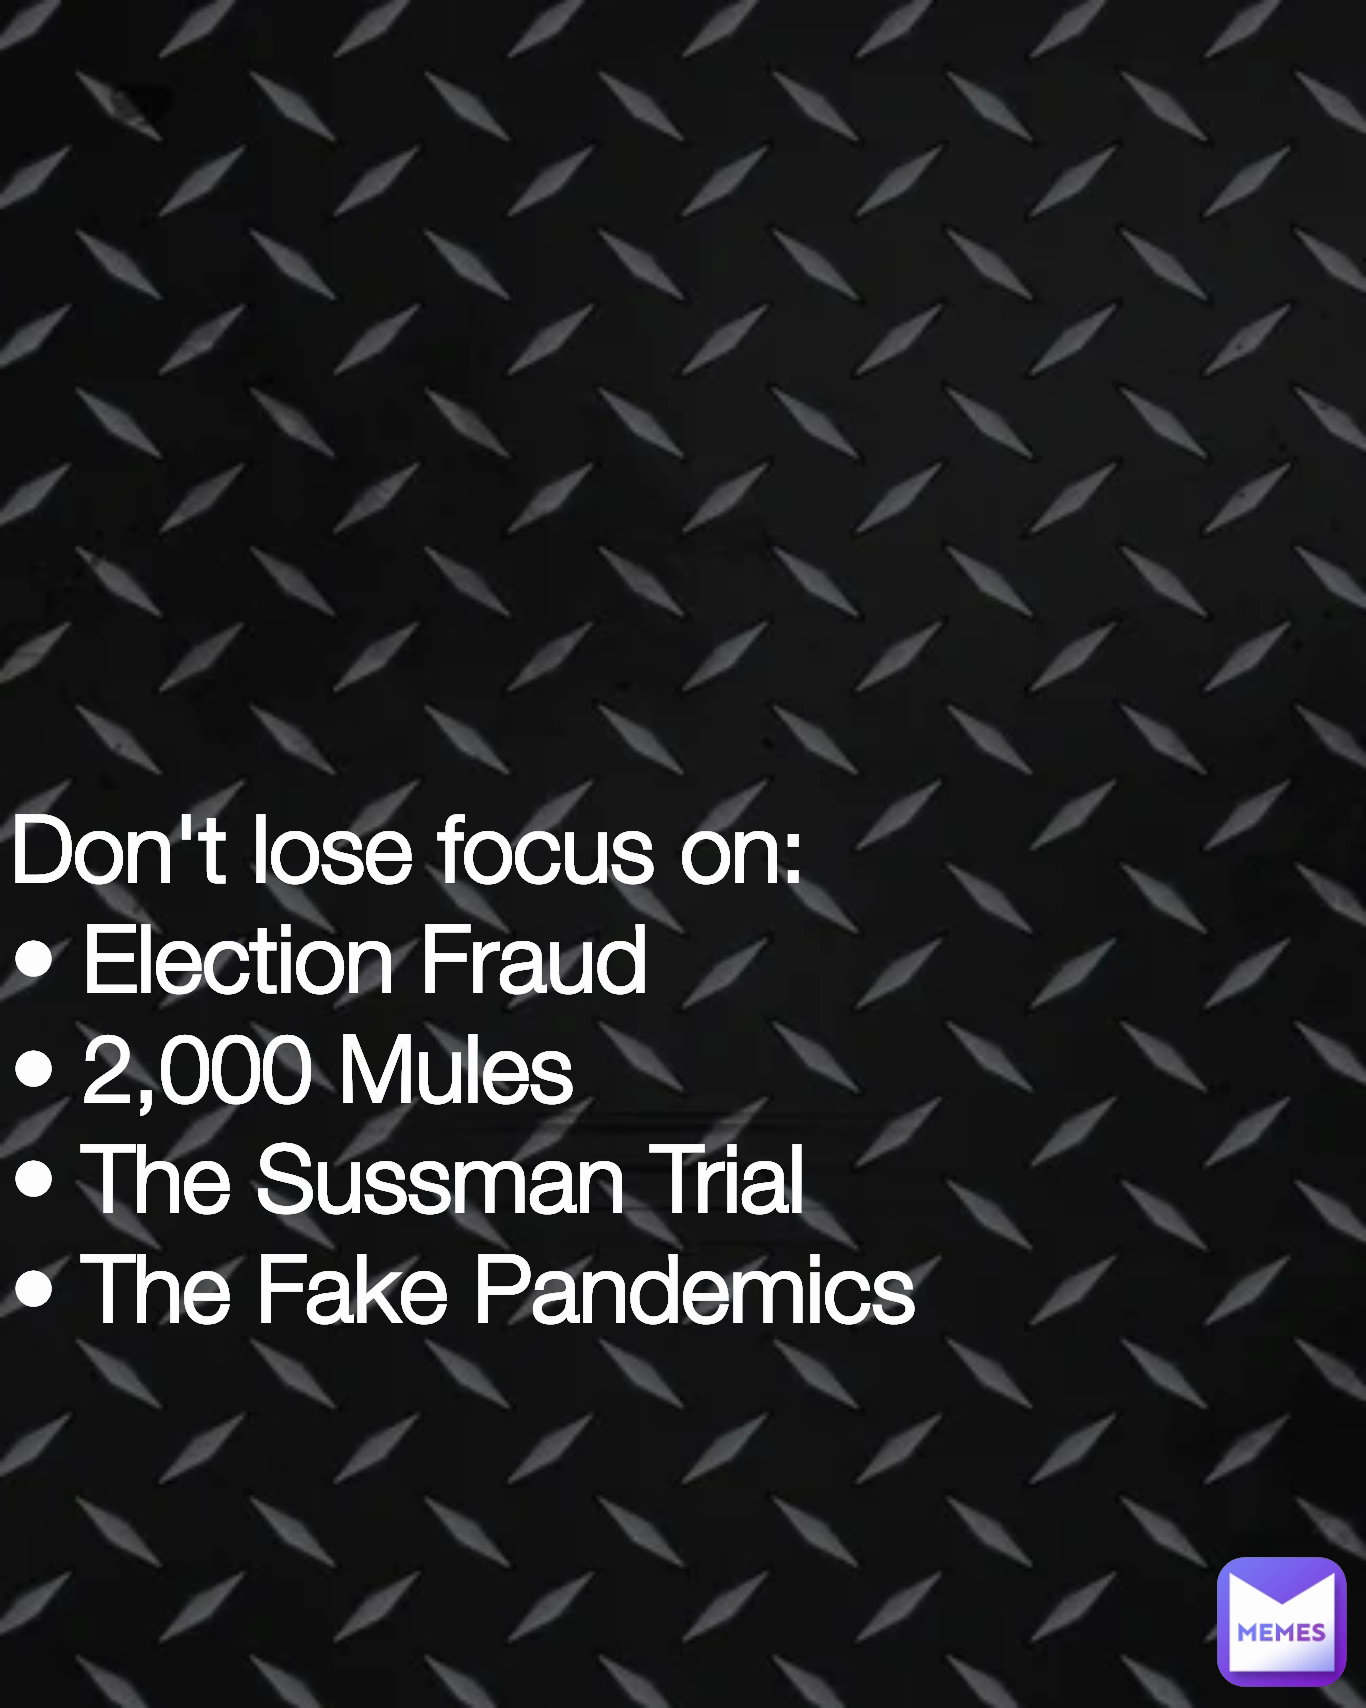 Don't lose focus on:
• Election Fraud 
• 2,000 Mules
• The Sussman Trial 
• The Fake Pandemics